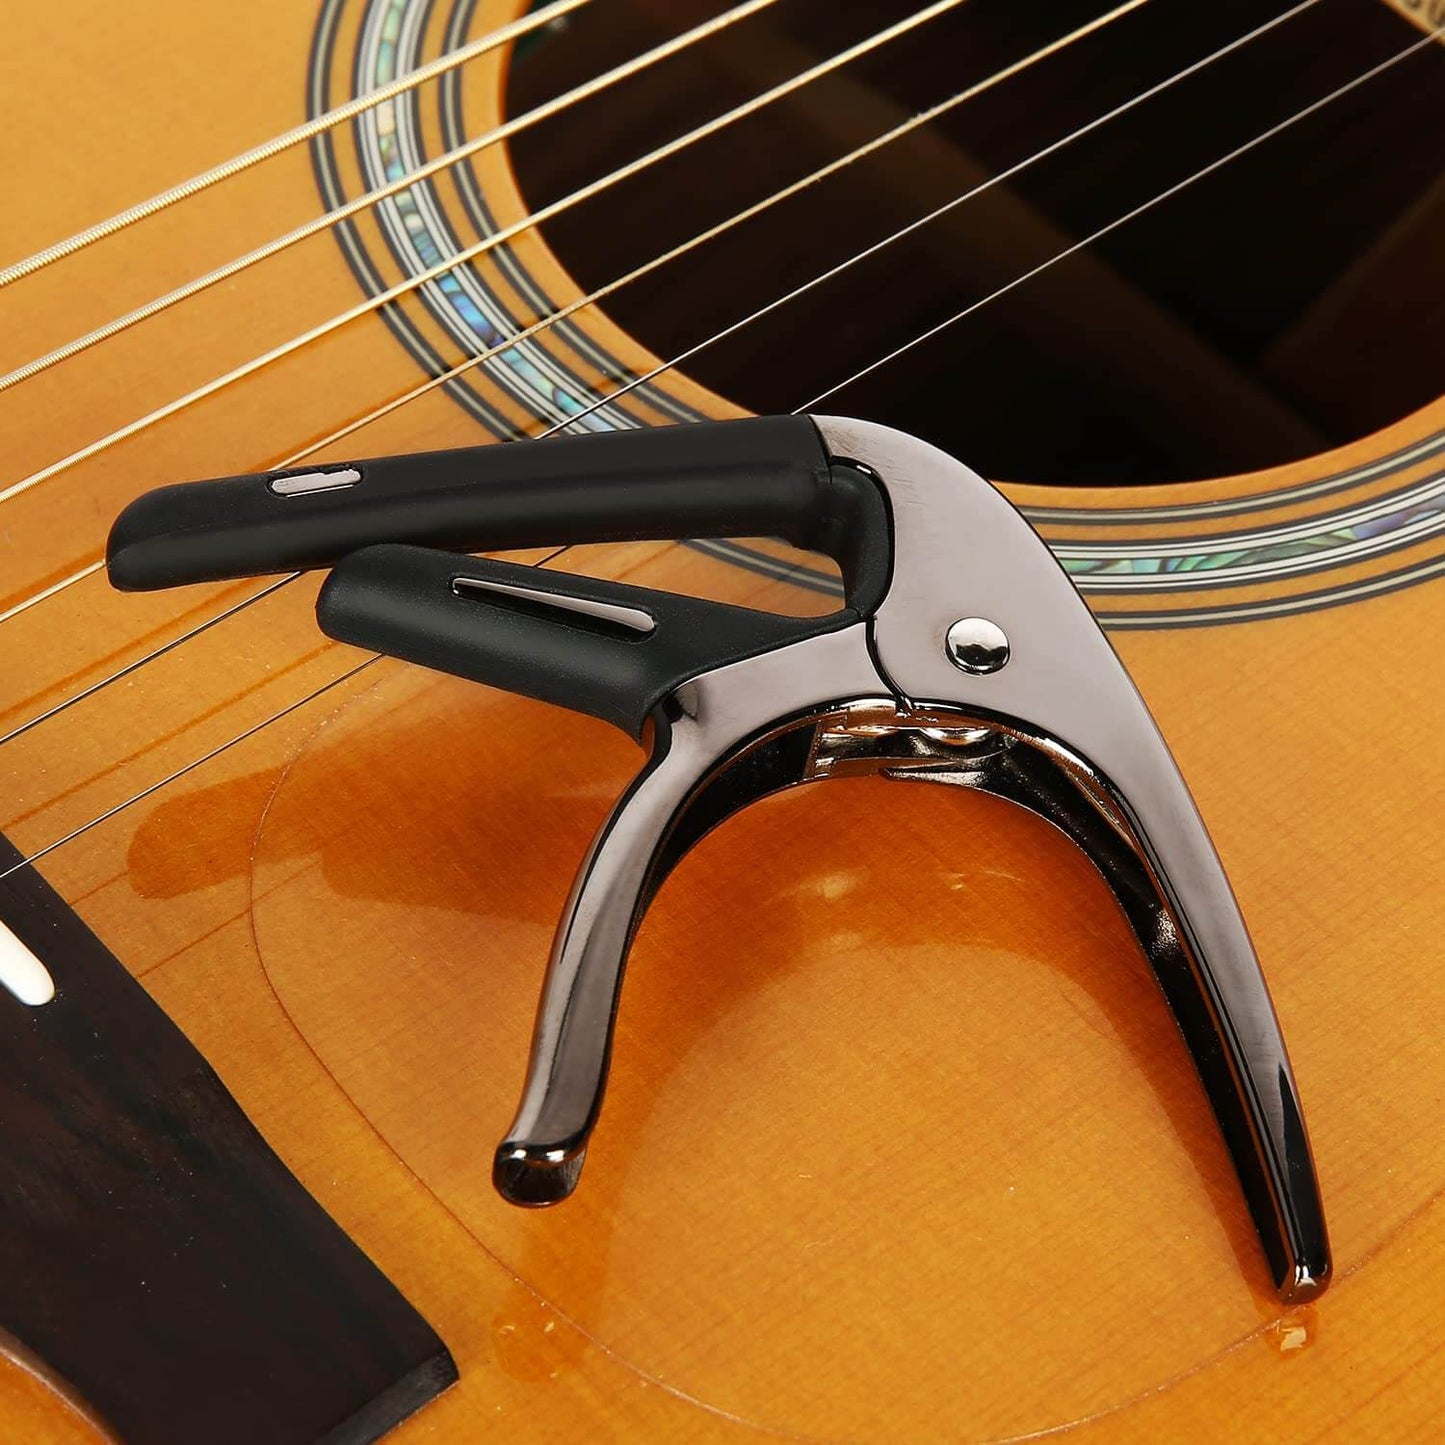 SGPRO Capo for Acoustic Guitars Electric Guitars and Ukuleles with Thin and Light, Hidden Torsion Spring, Cold-light Black Color, and Zinc Alloy Design